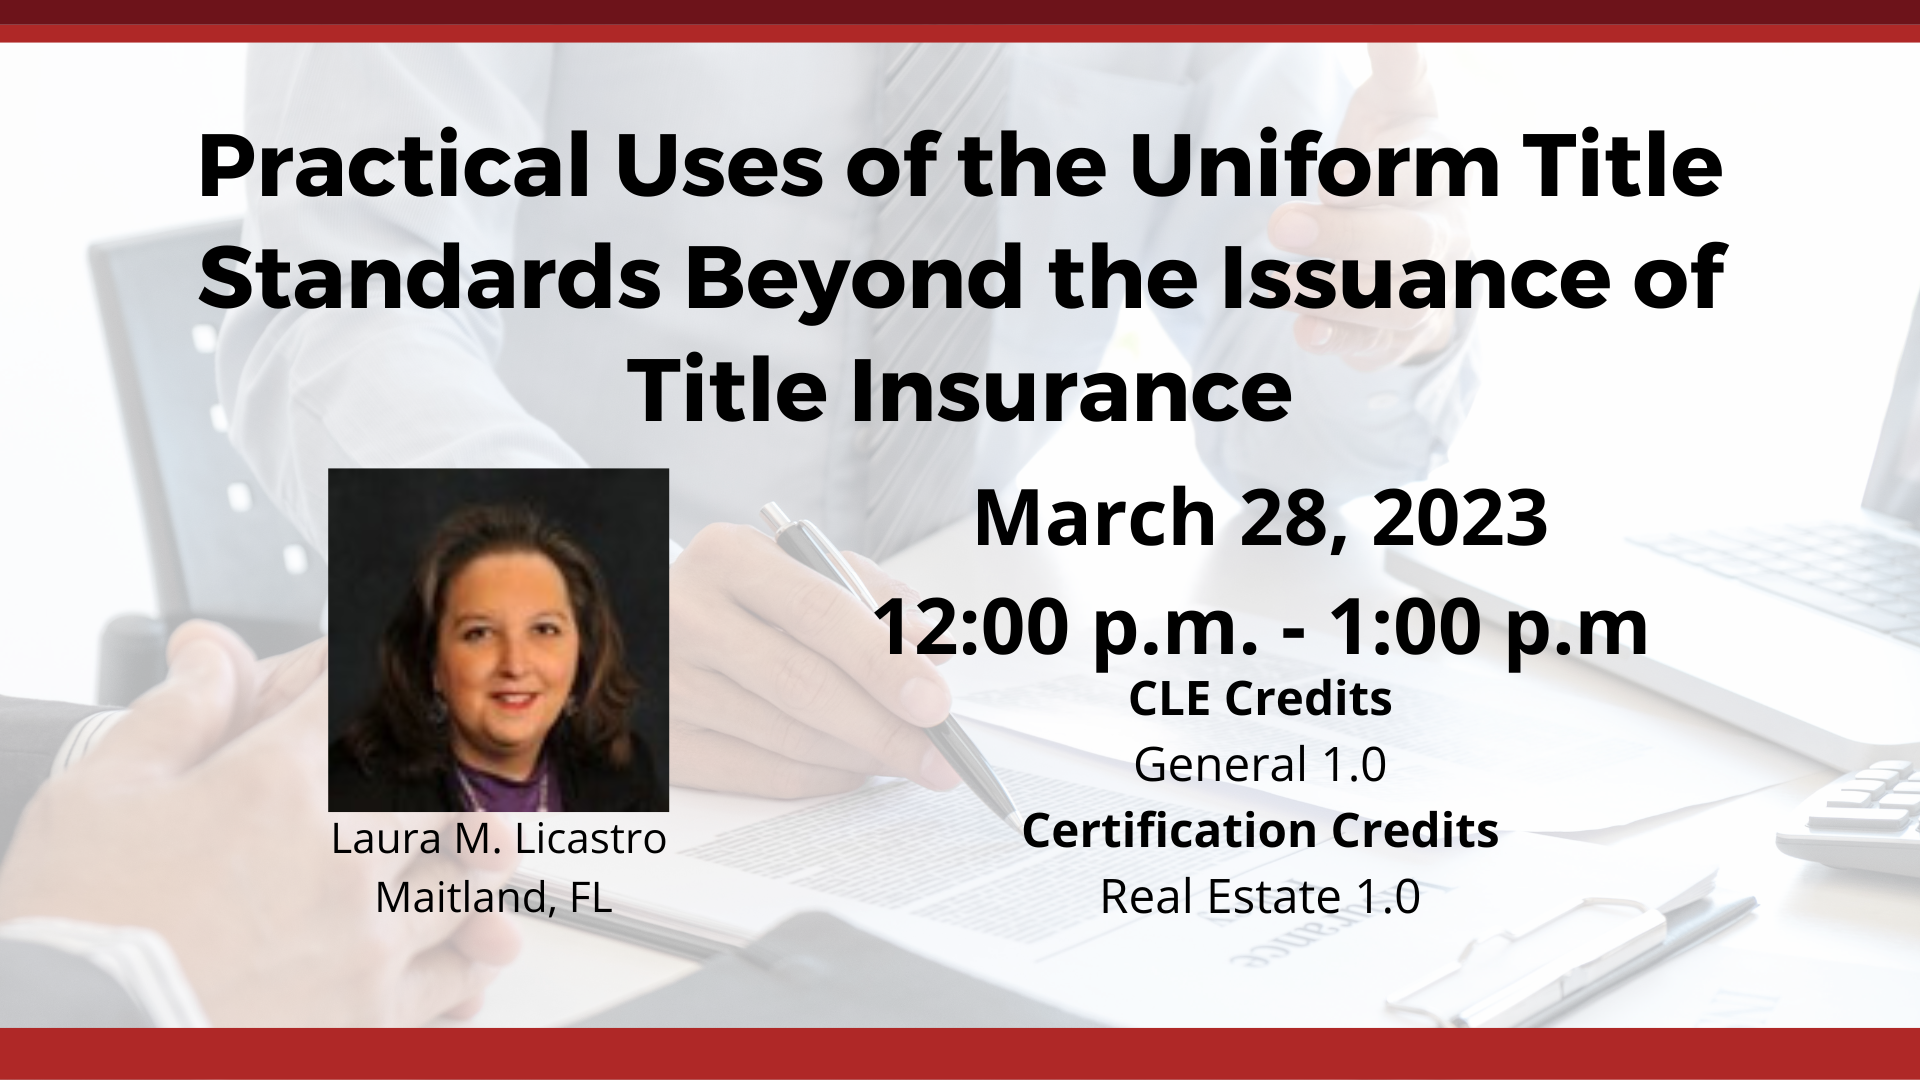 Practical Uses of the Uniform Title Standards Beyond the Issuance of Title Insurance